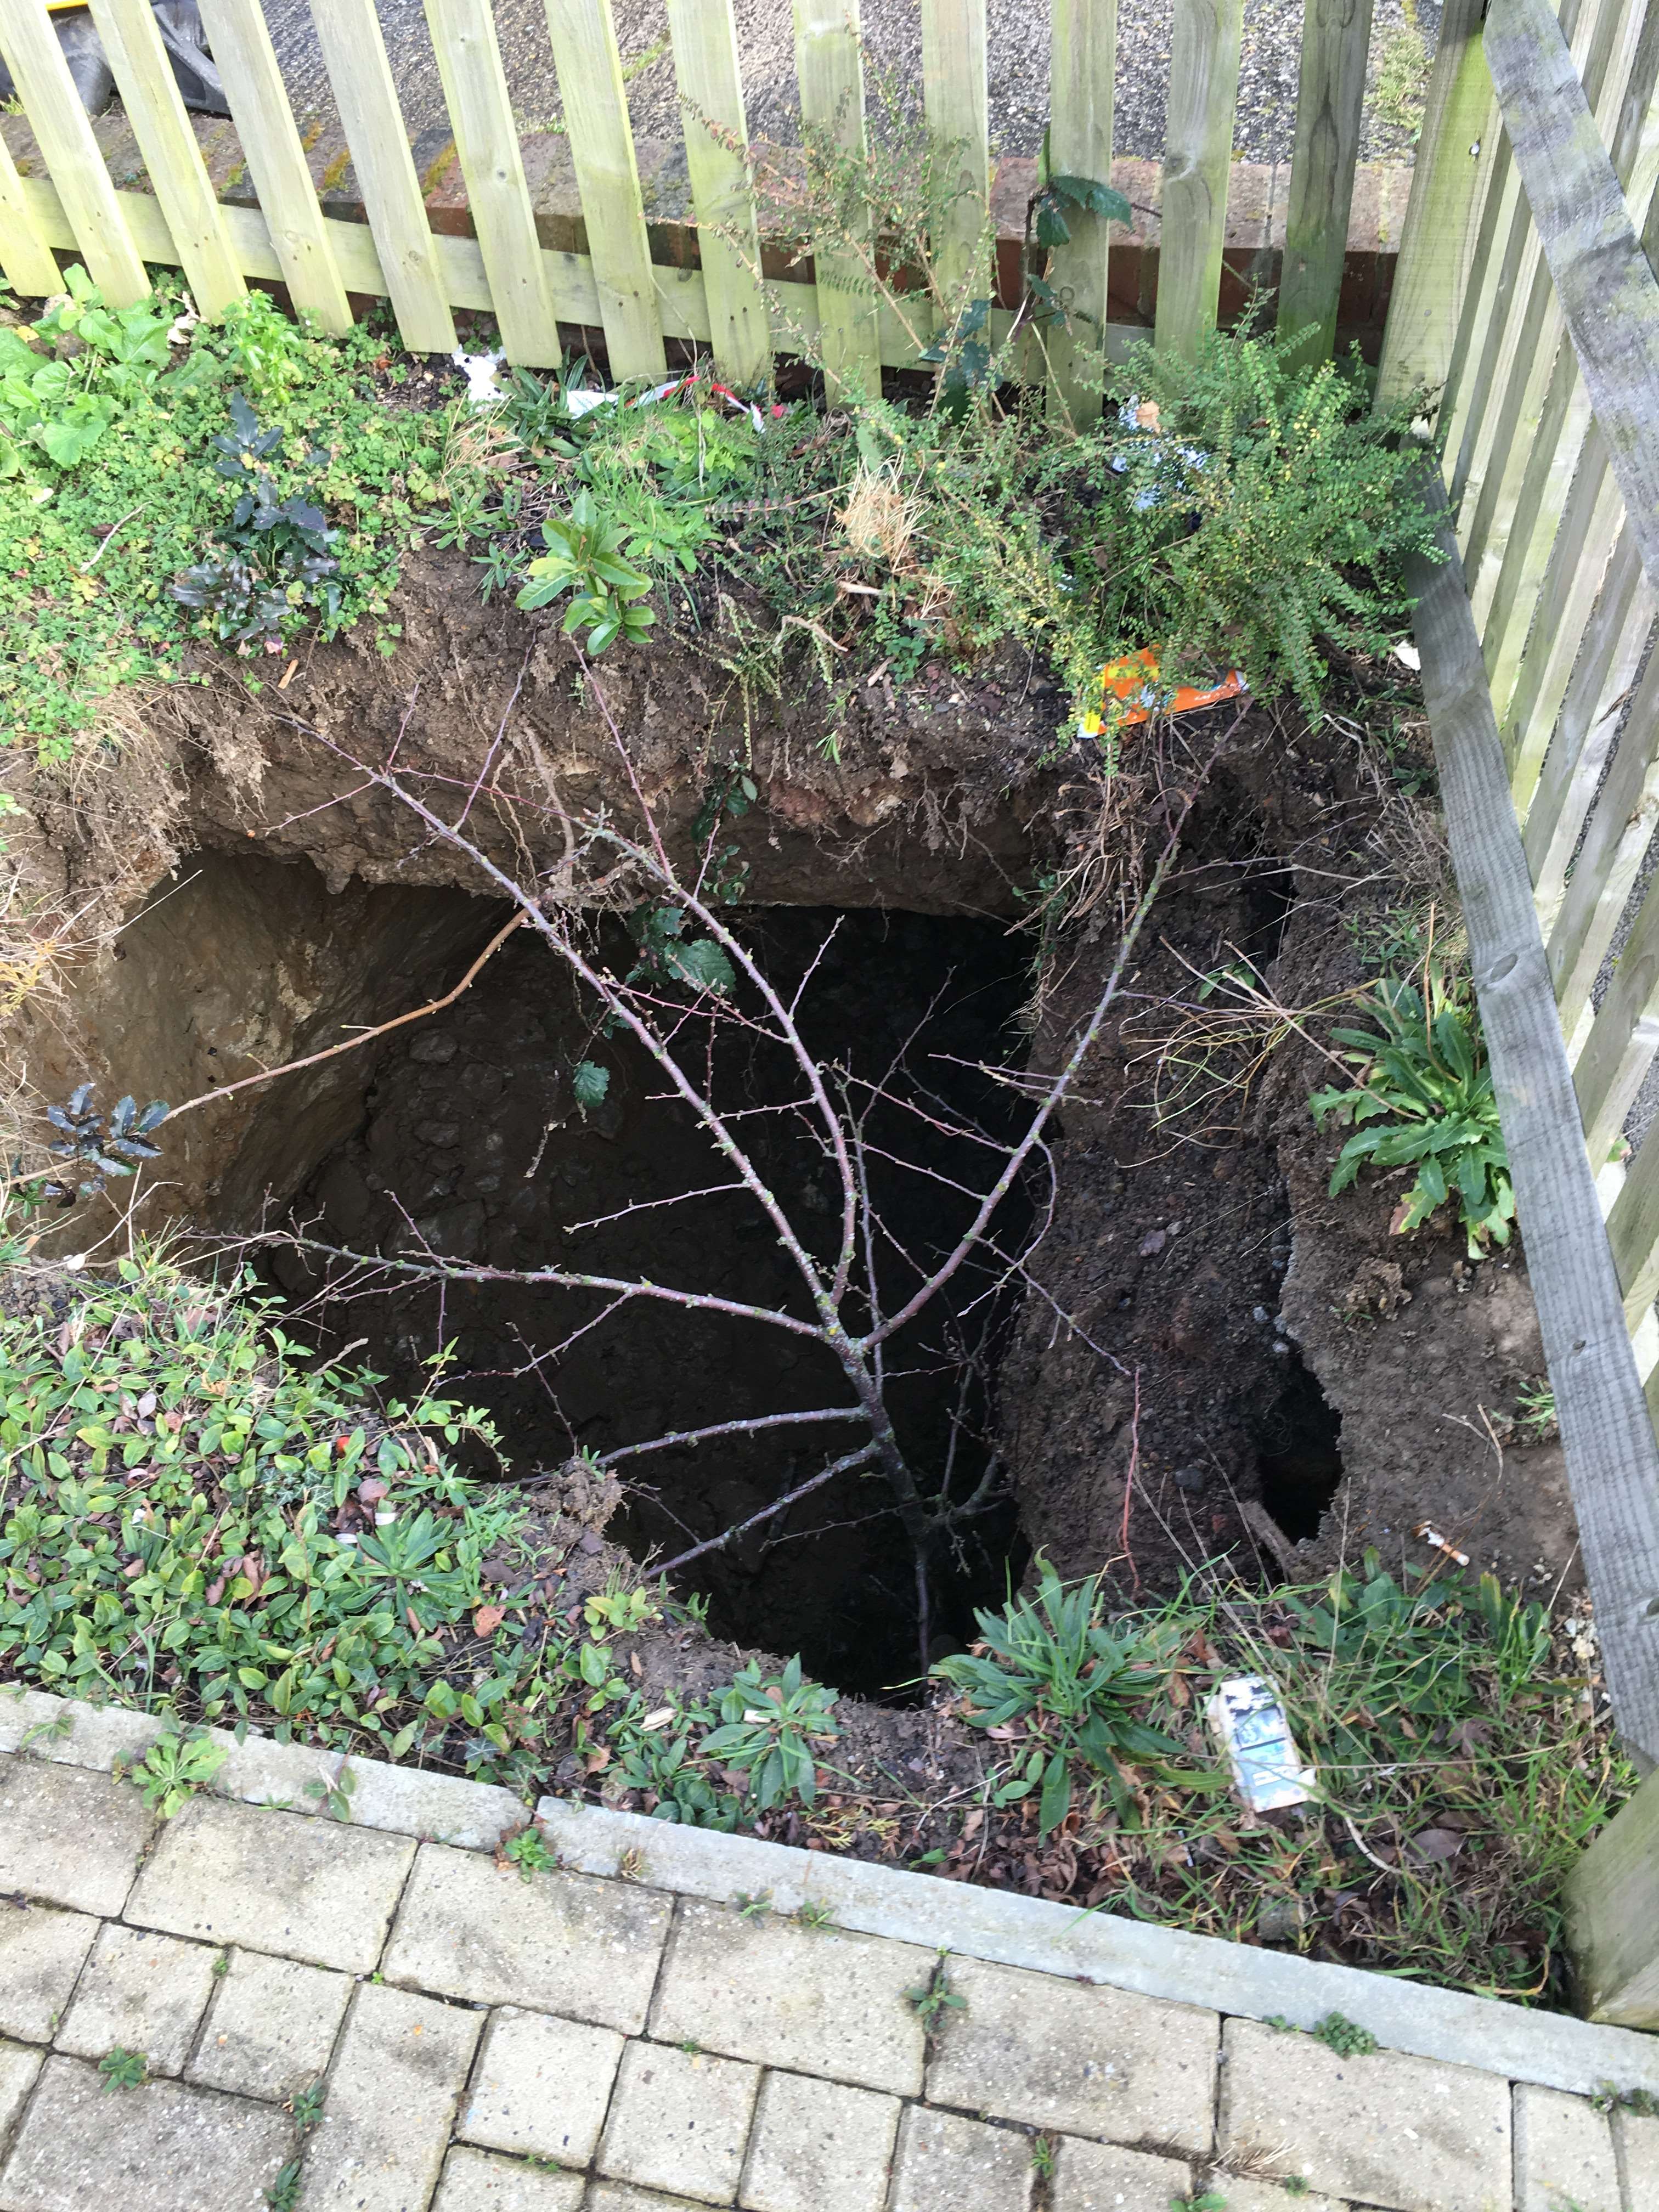 The sink hole in Boughton